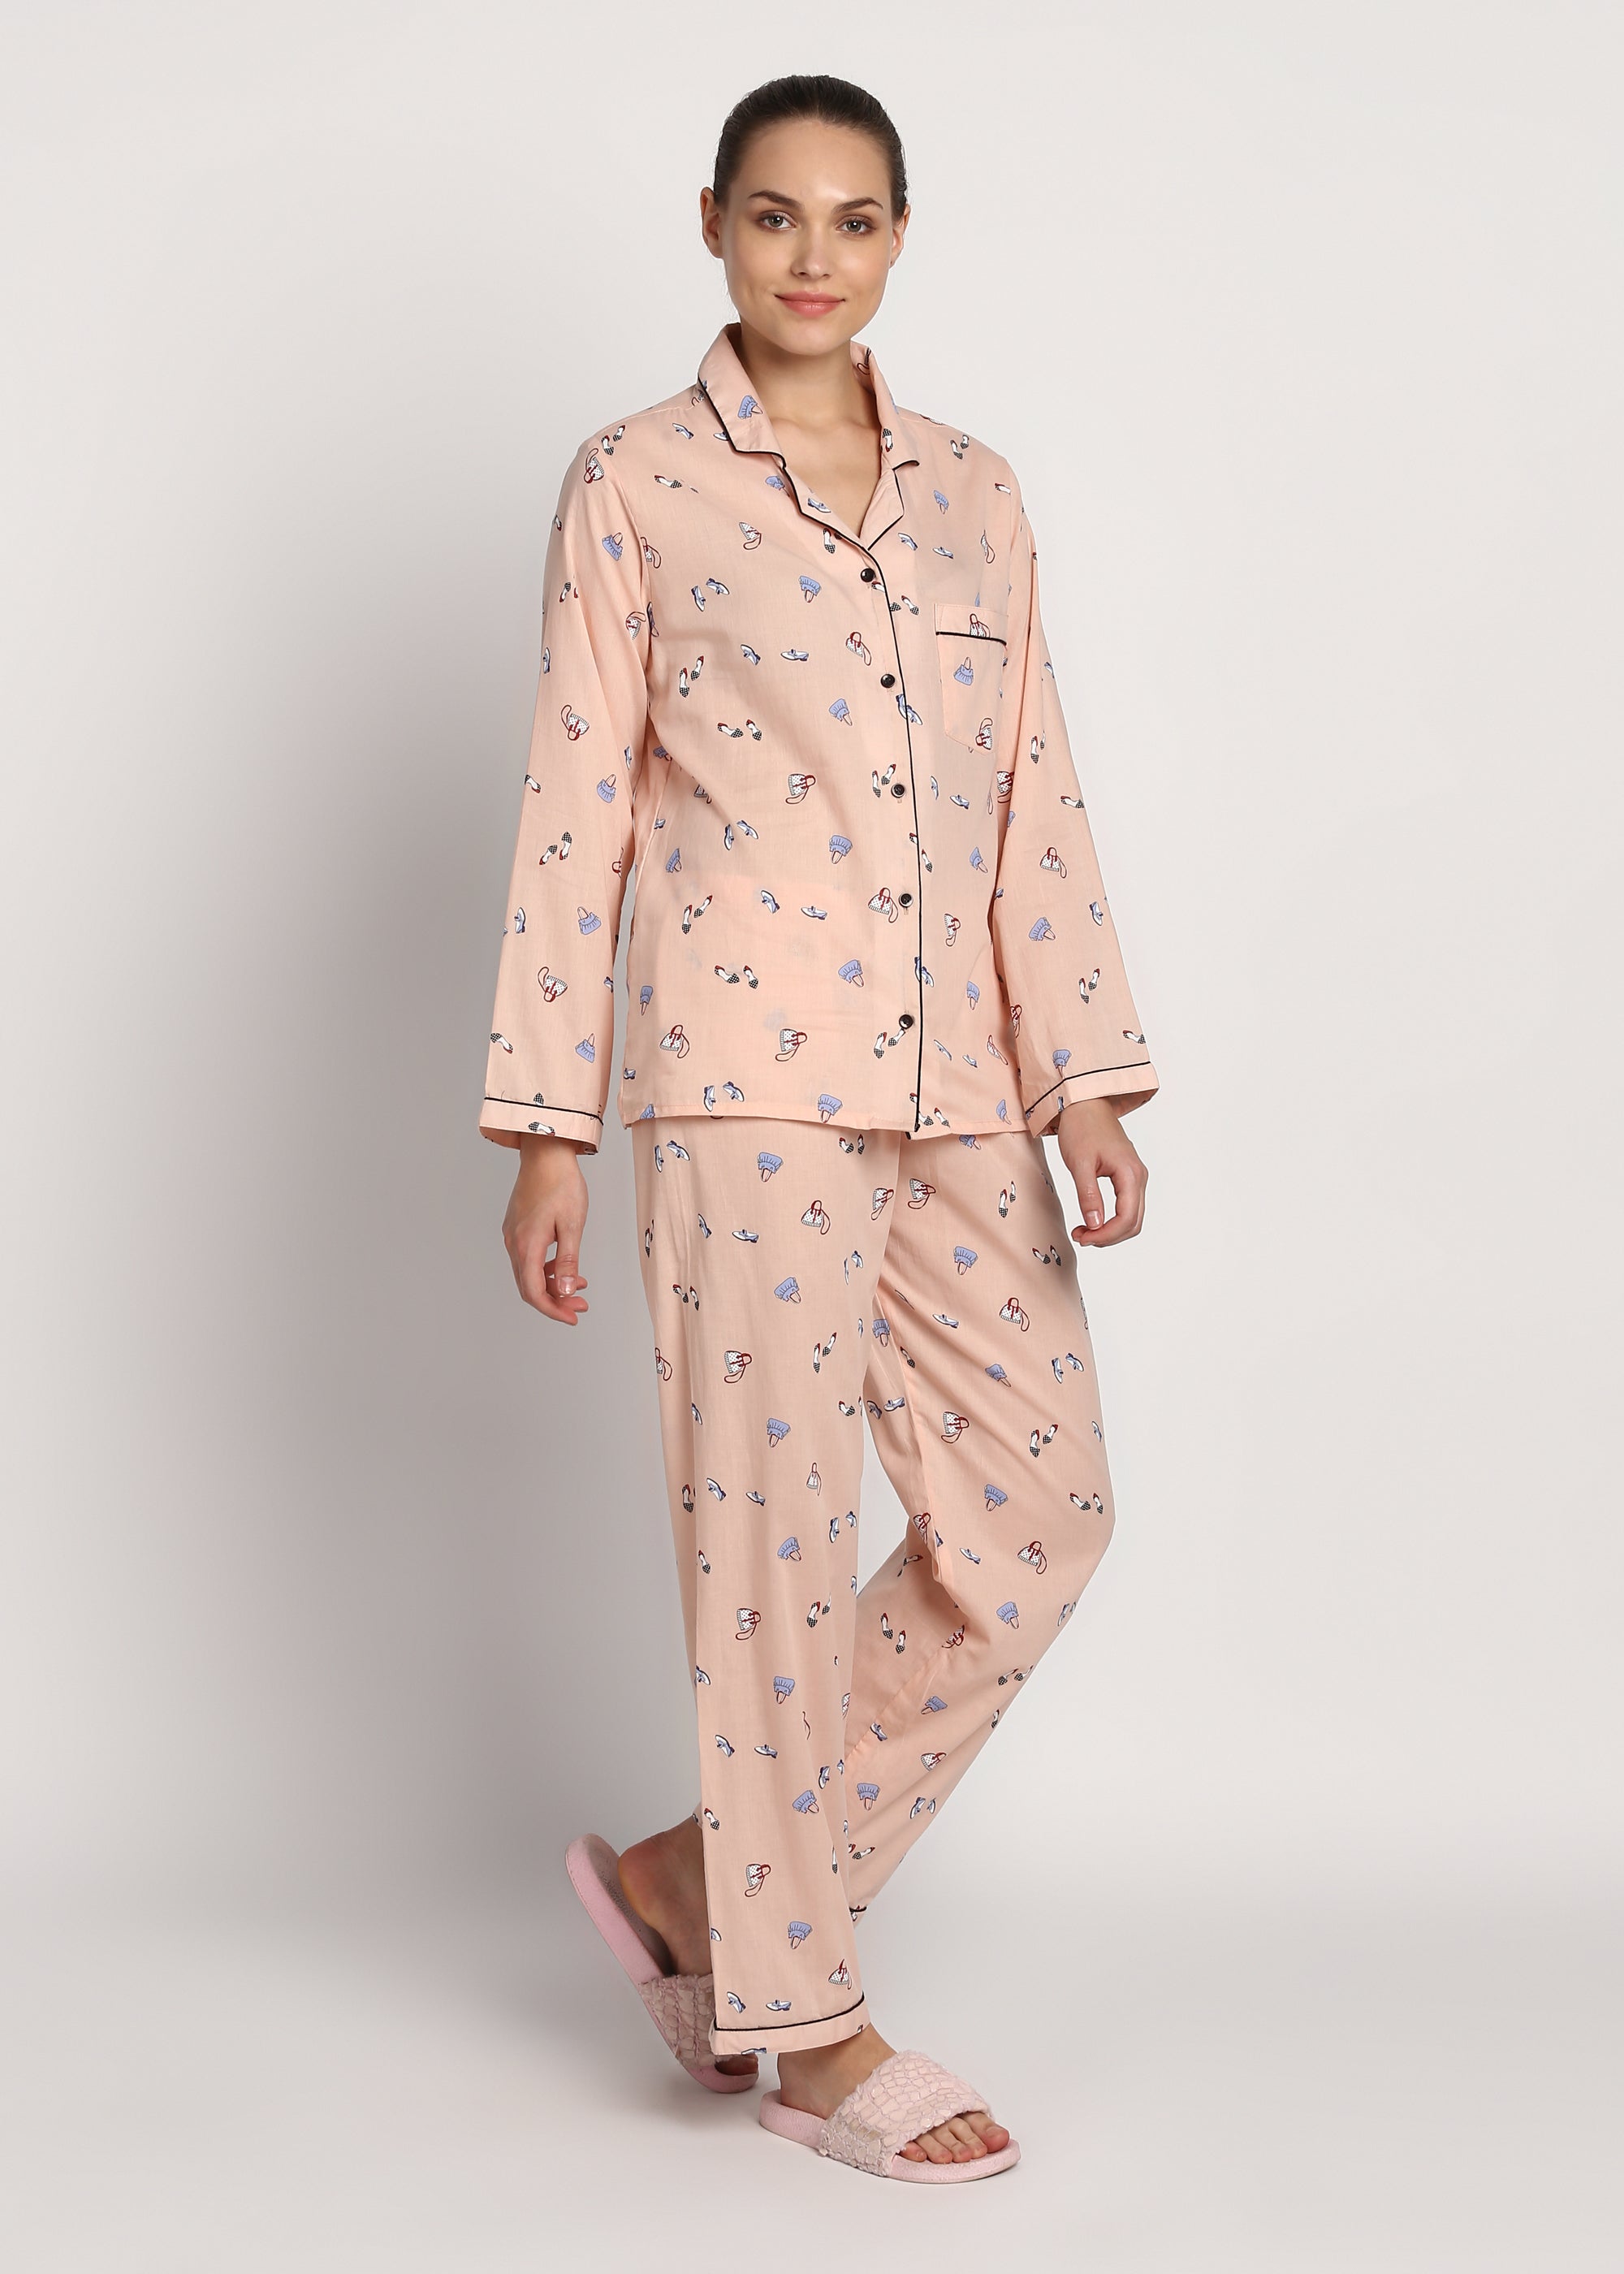 Bags and Shoes Print Long Sleeve Women's Night Suit - Shopbloom